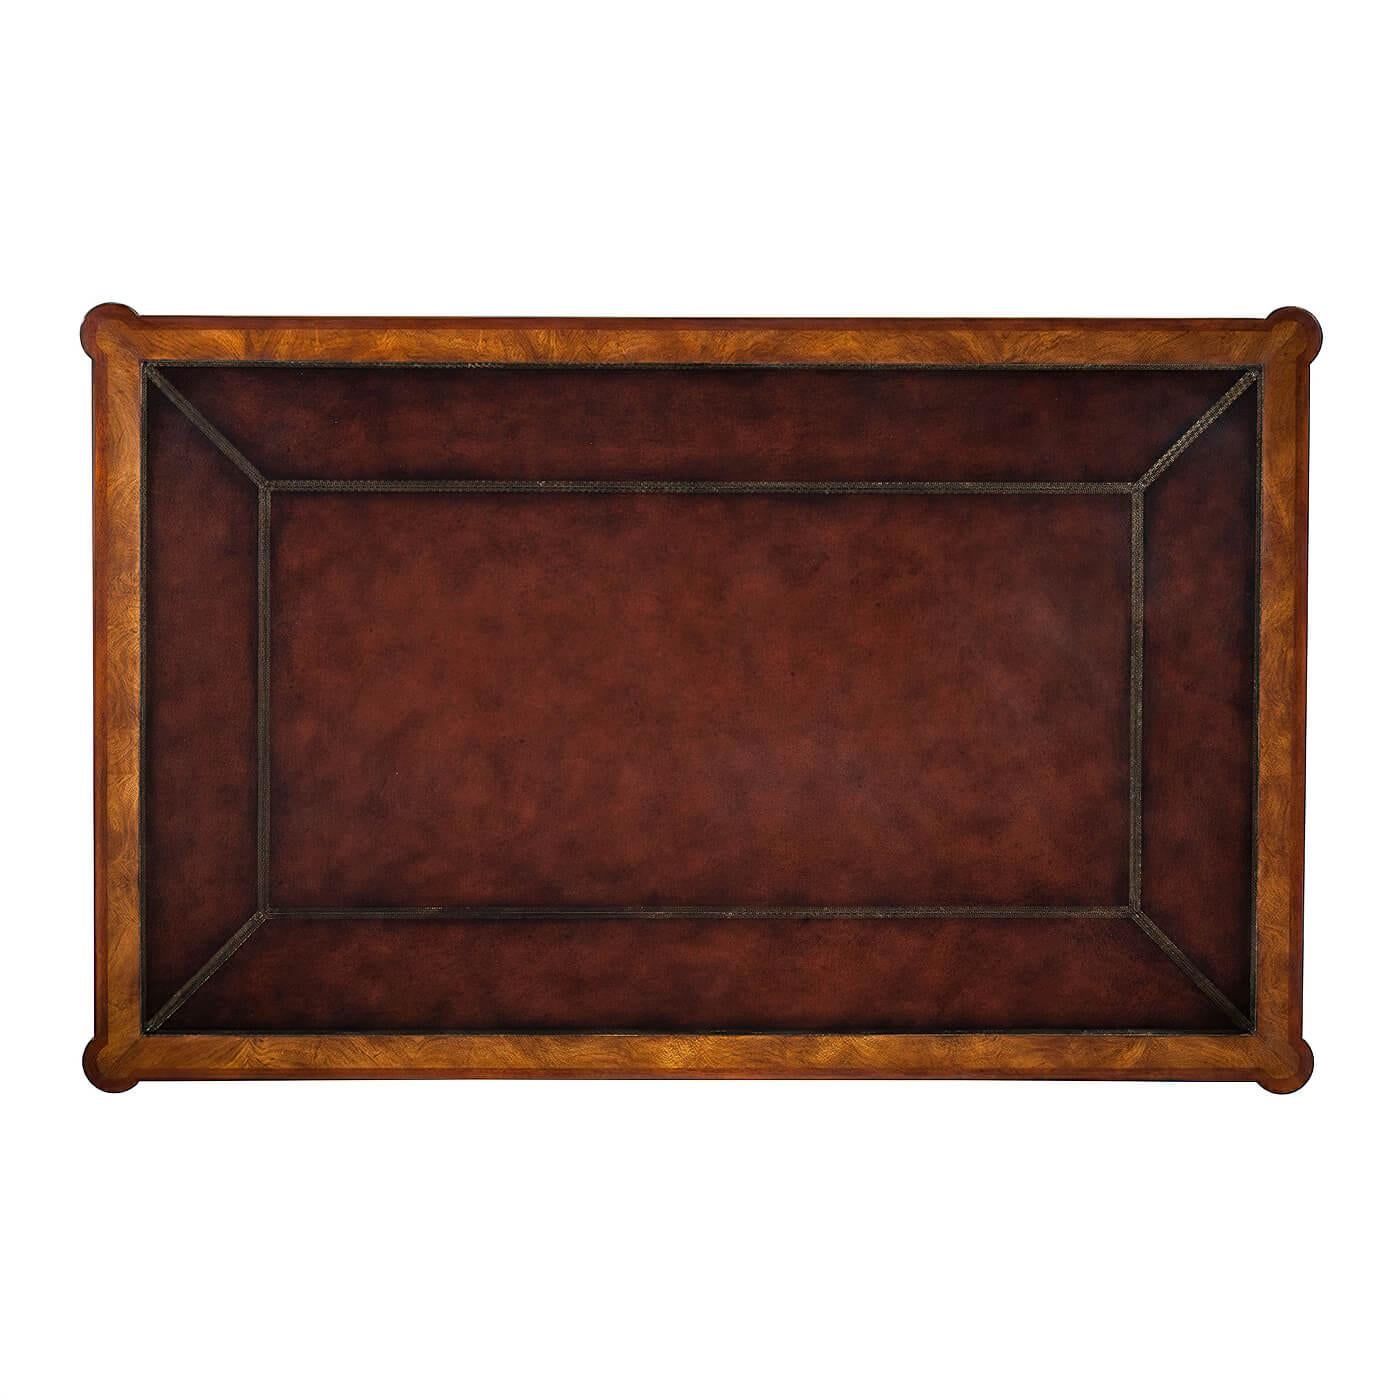 A mahogany and flame veneered writing table, the tooled leather inset top with protruding rounded corners above three frieze drawers on turned legs with brass castors.

Dimensions: 55.5